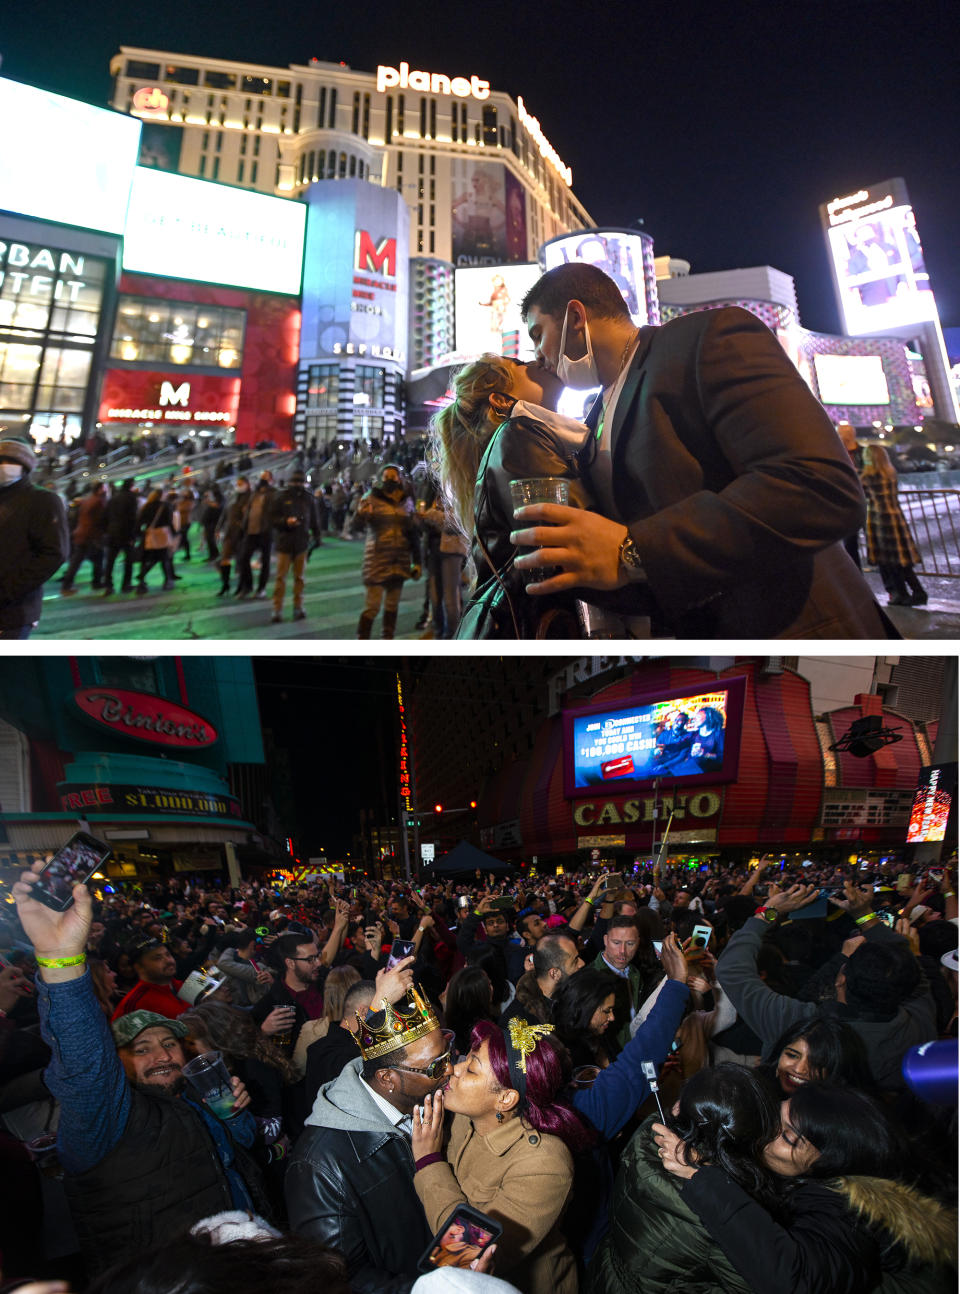 A combo of images shows a couple kissing, top, as they celebrate New Year's Eve along the Las Vegas Strip late on Thursday, Dec 31, 2020, in Las Vegas and bottom, revelers celebrate during a New Year's party in downtown Las Vegas in the first moments on Wednesday, Jan. 1, 2020. As the world says goodbye to 2020, there will be countdowns and live performances, but no massed jubilant crowds in traditional gathering spots like the Champs Elysees in Paris and New York City's Times Square this New Year's Eve. The virus that ruined 2020 has led to cancelations of most fireworks displays and public events in favor of made-for-TV-only moments in party spots like London and Rio de Janeiro. (AP Photo/David Becker and Chase Stevens/Las Vegas Review-Journal via AP)